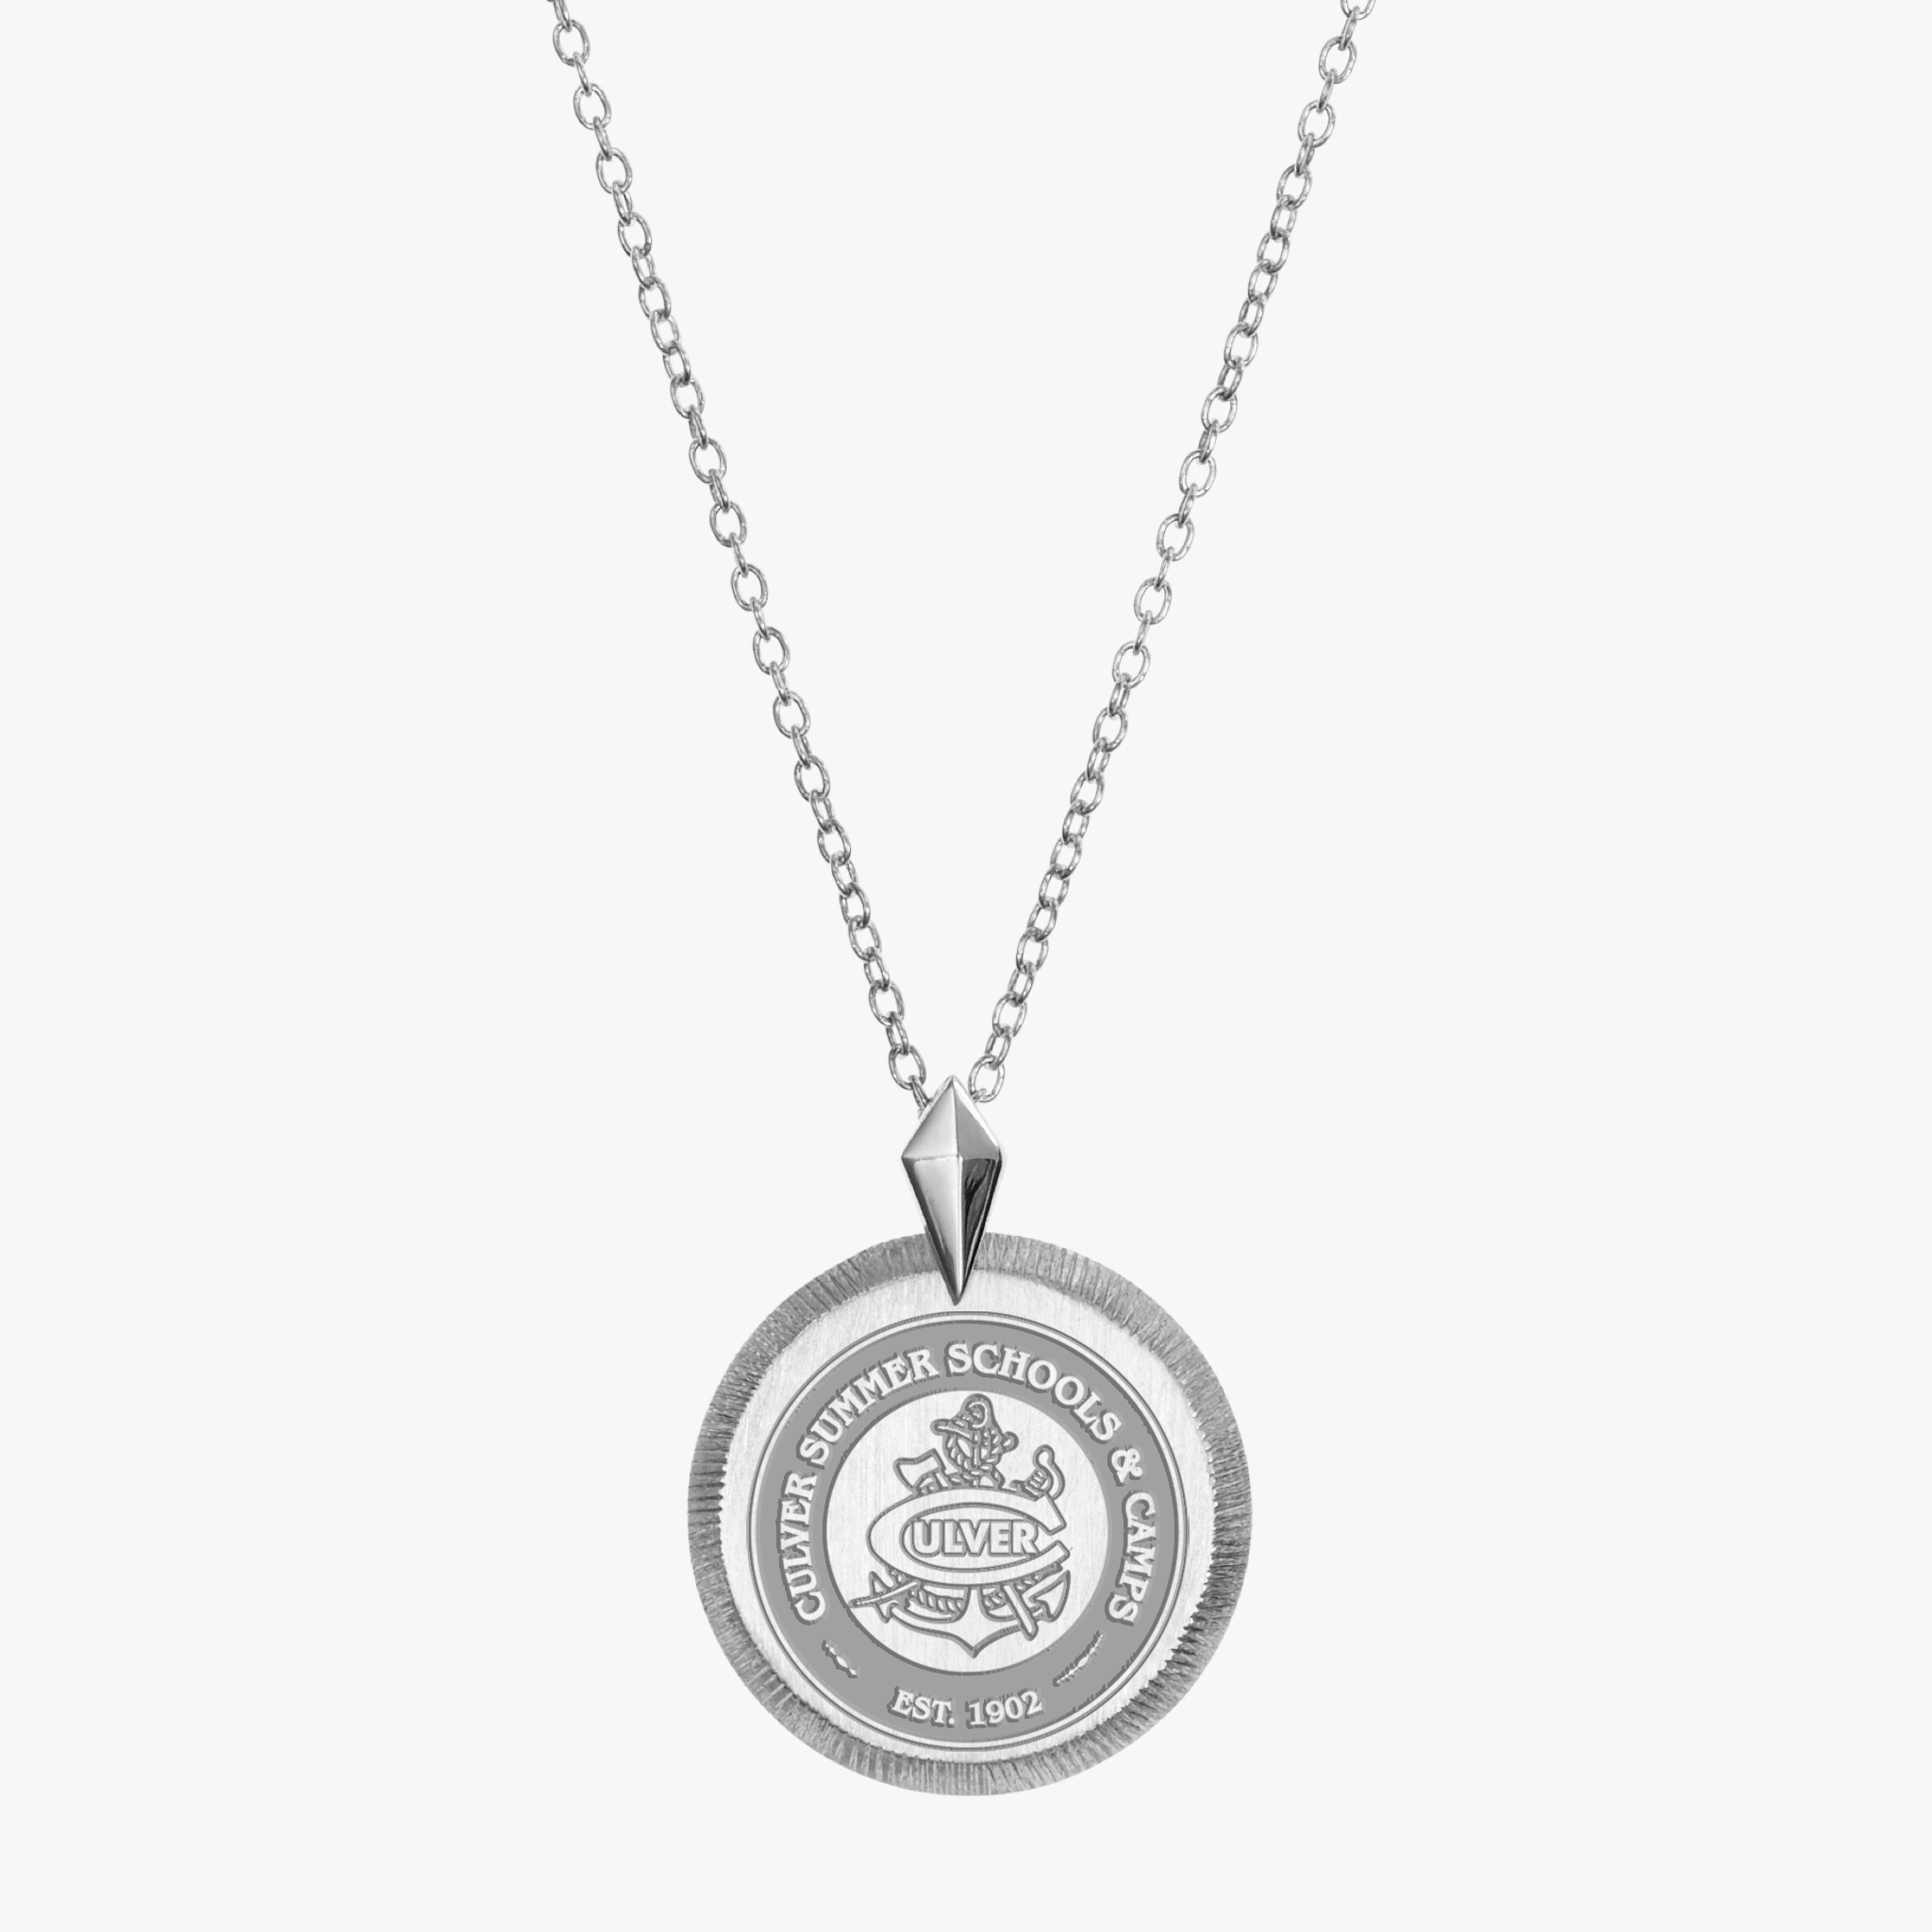 CSSC Seal Florentine Necklace - Sterling Silver